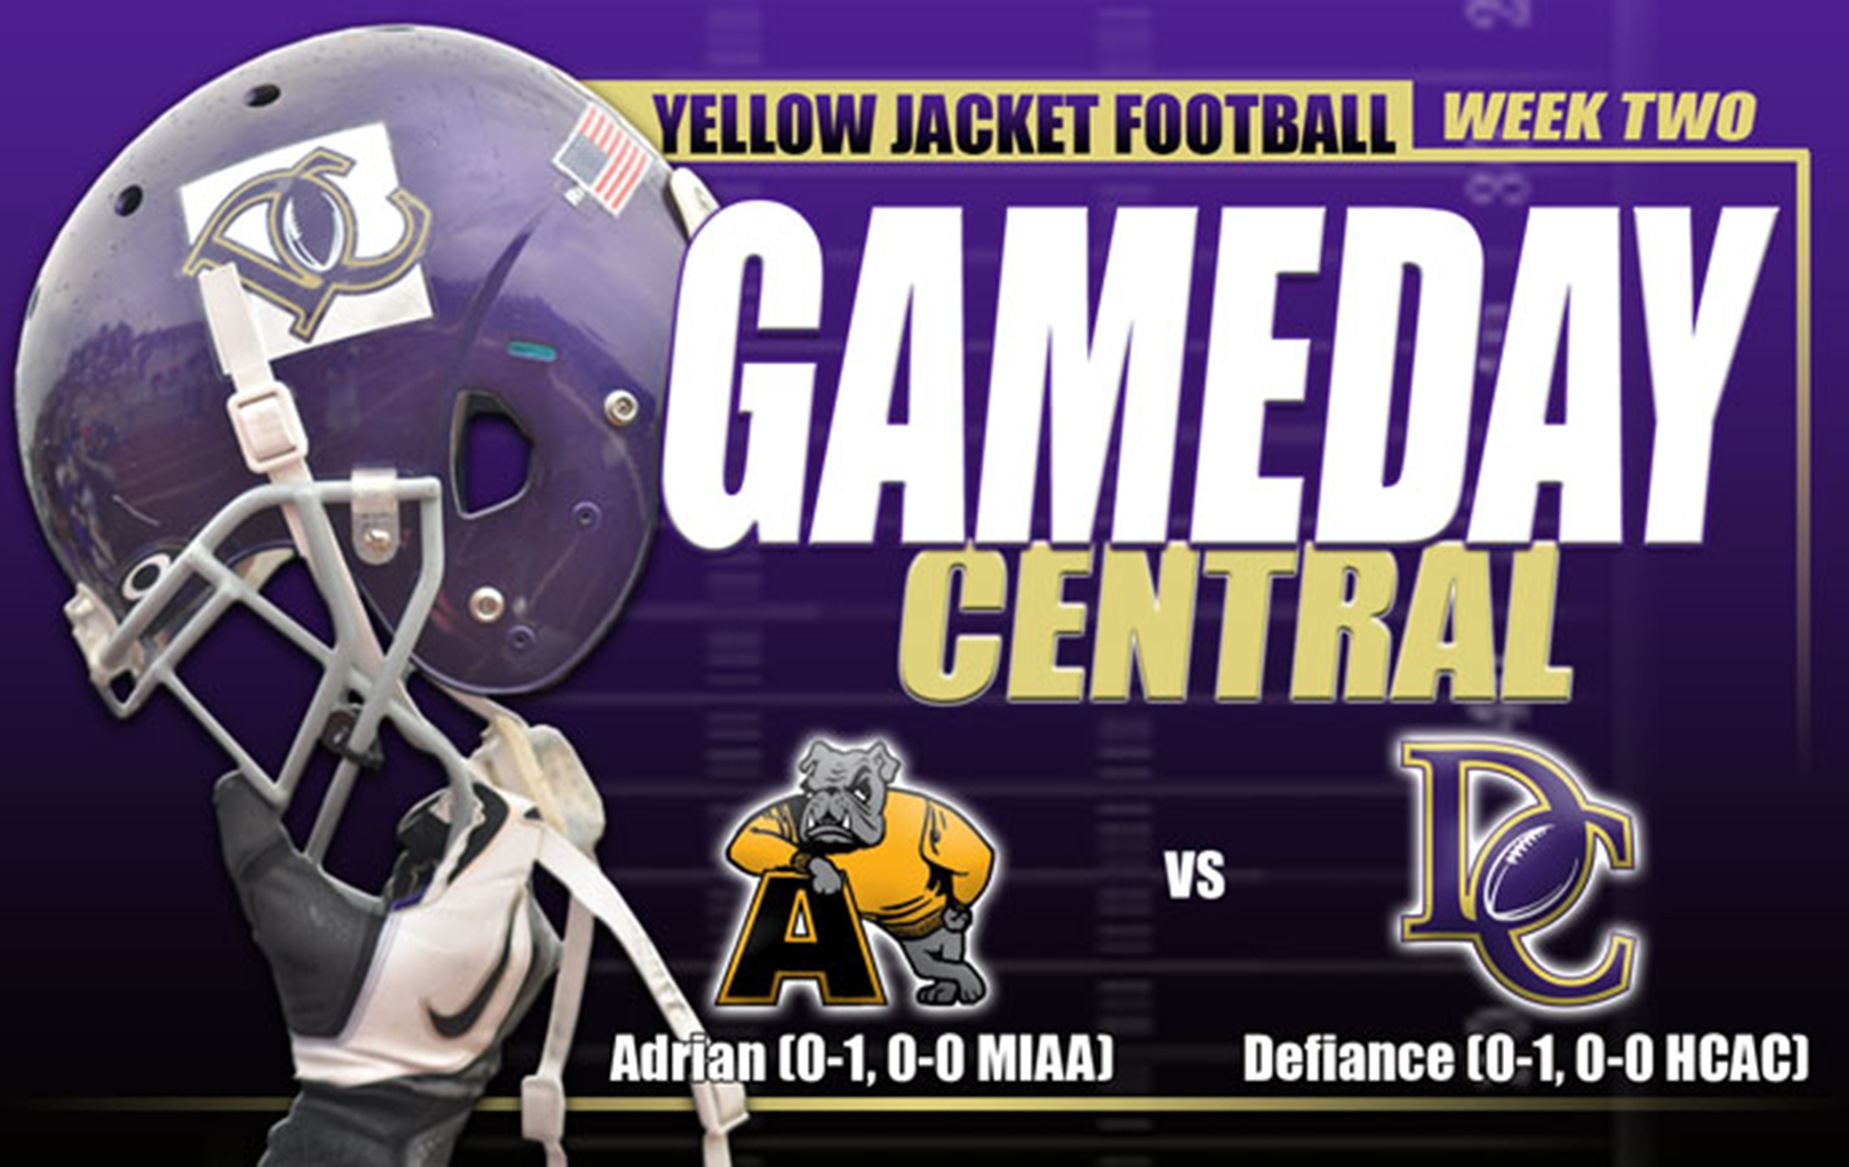 GAMEDAY CENTRAL - Defiance at Adrian - Game Two